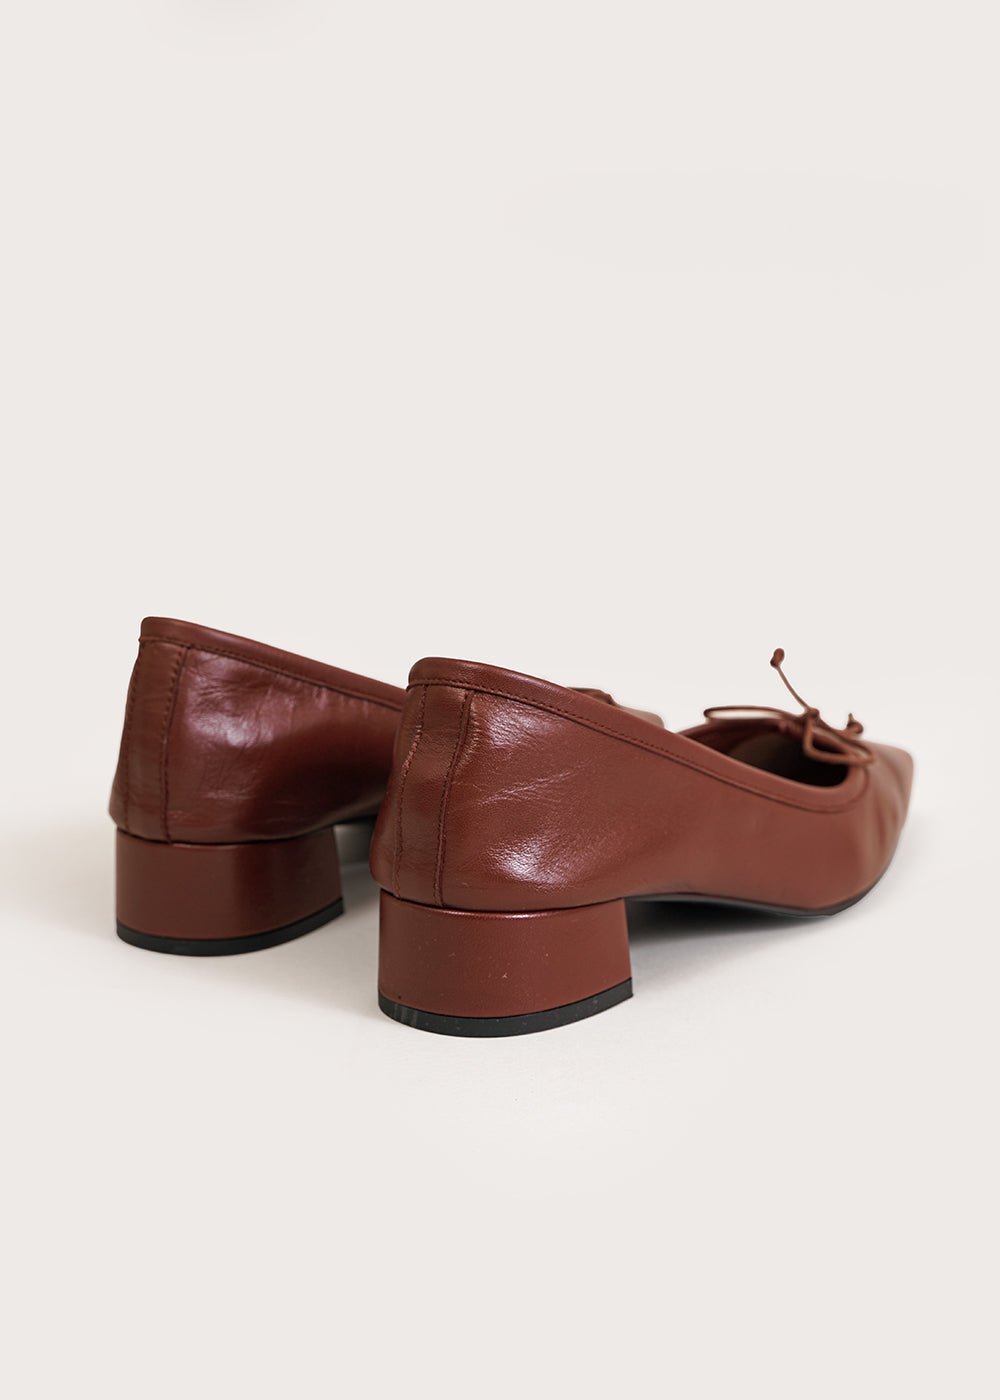 About Arianne Cacao Mina Pumps - New Classics Studios Sustainable Ethical Fashion Canada